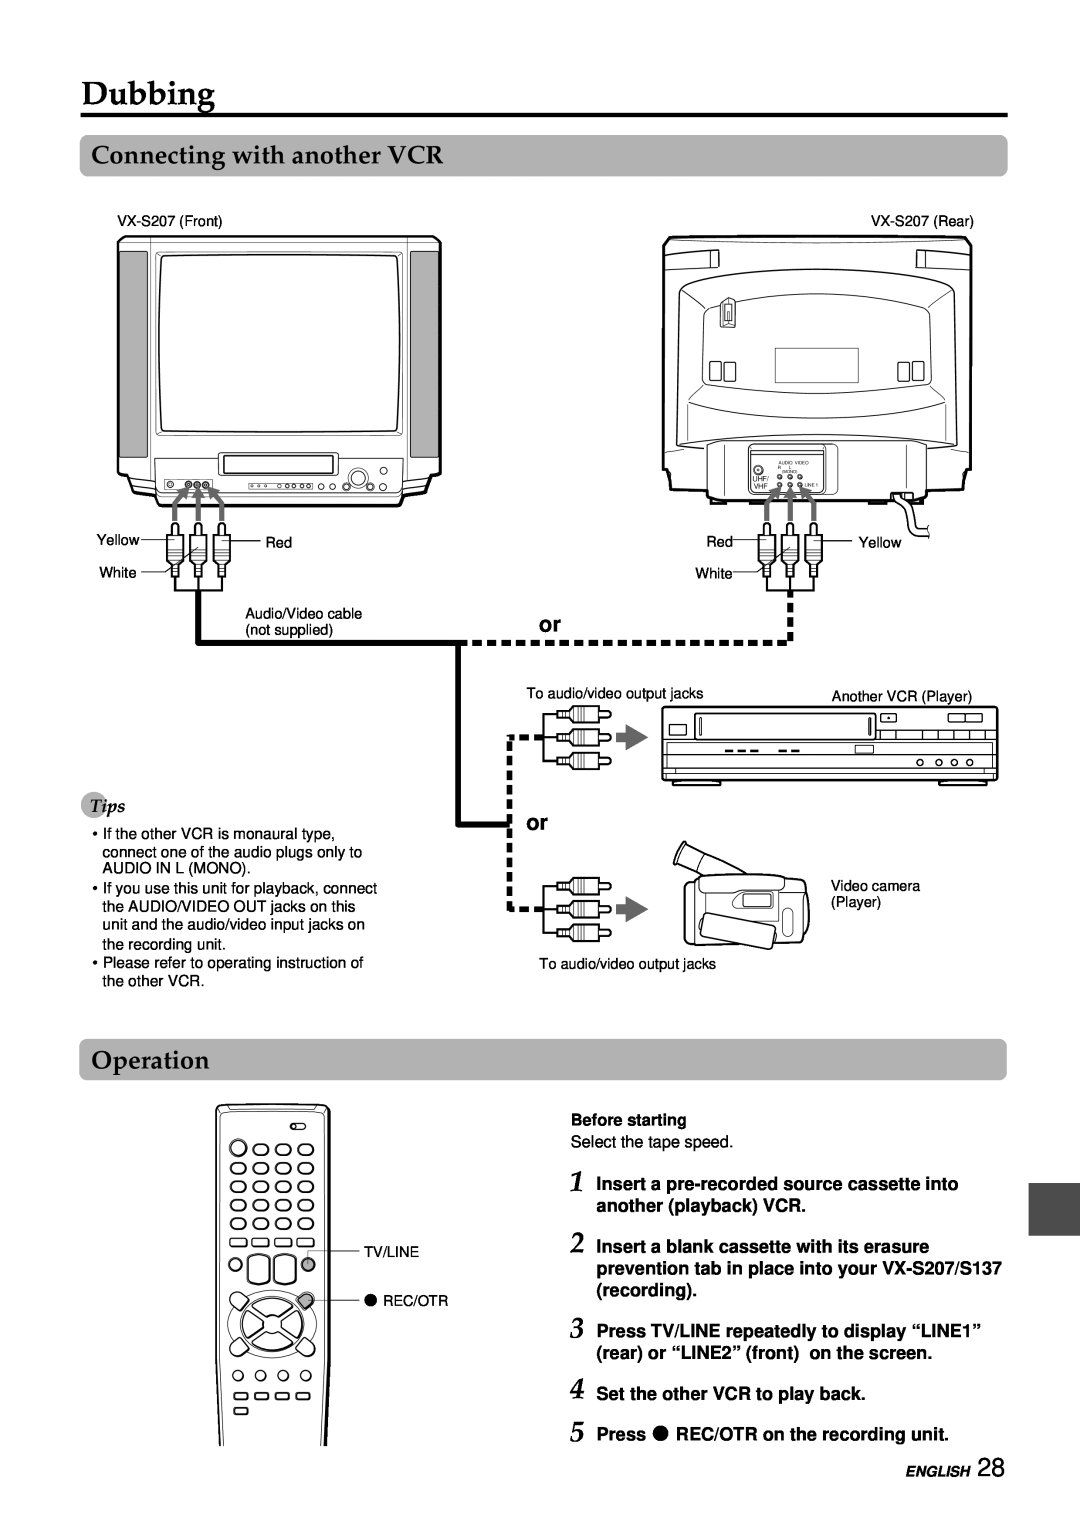 Aiwa VX-S207U, VX-S137U manual Dubbing, Connecting with another VCR, Operation, Tips, Set the other VCR to play back 